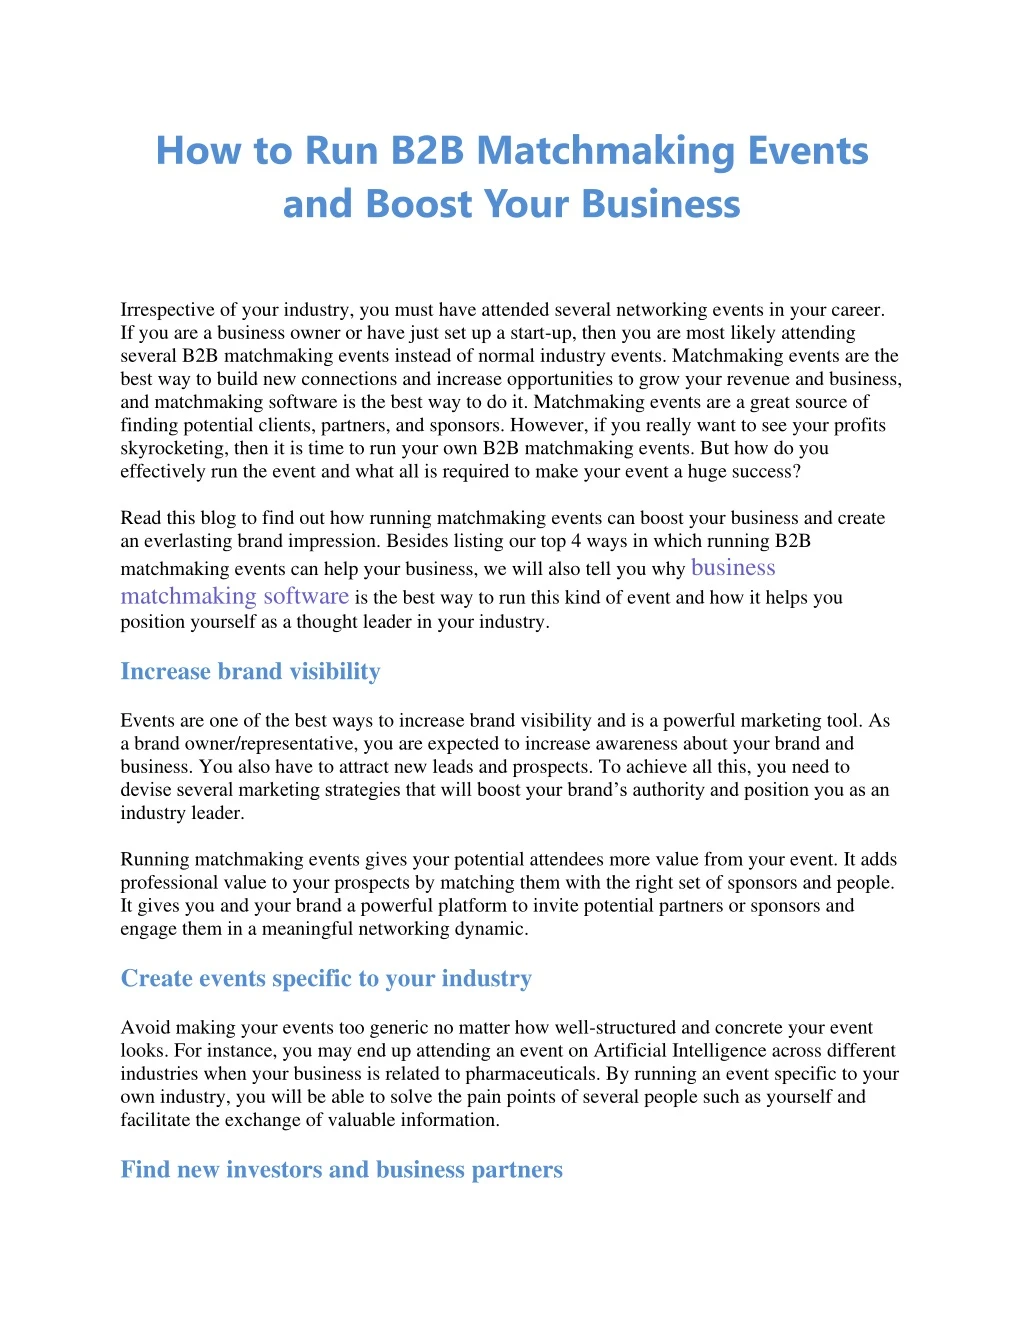 how to run b2b matchmaking events and boost your